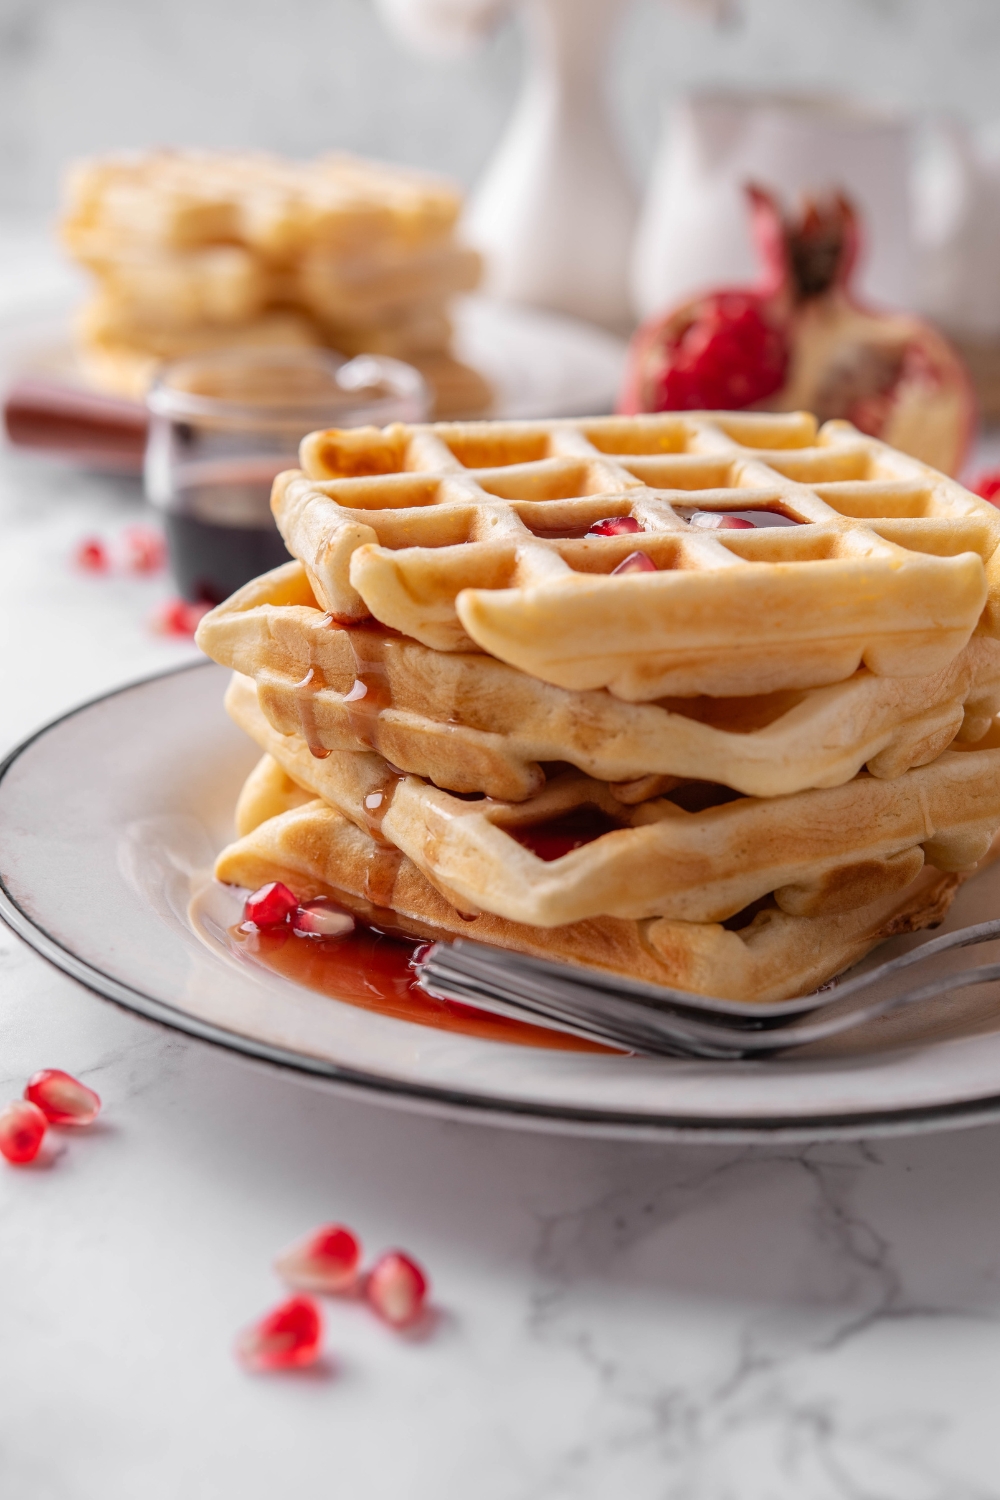 Four waffles stacked on top of each other with maple syrup dripping down the sides of the waffles and pomegranate seeds sprinkled on top and around the waffles. There are two forks on the plate.